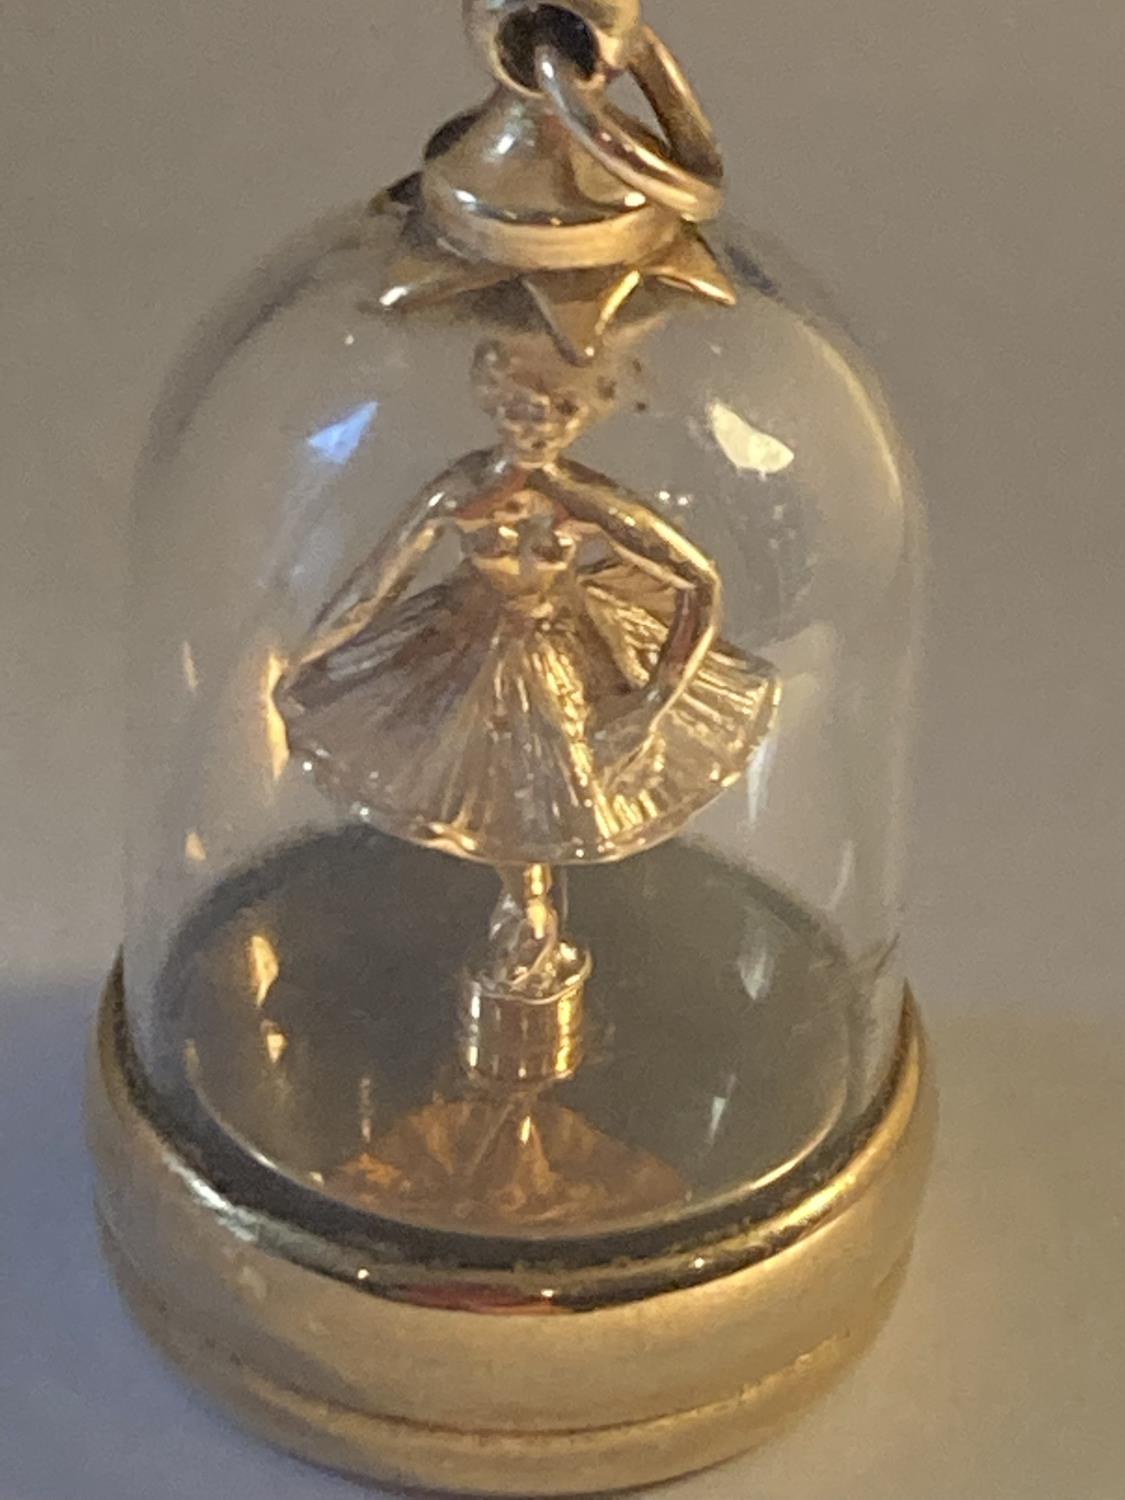 A 9 CARAT GOLD PENDANT WITH A BALLERINA IN A DOME GROSS WEIGHT 13.9 GRAMS - Image 2 of 4